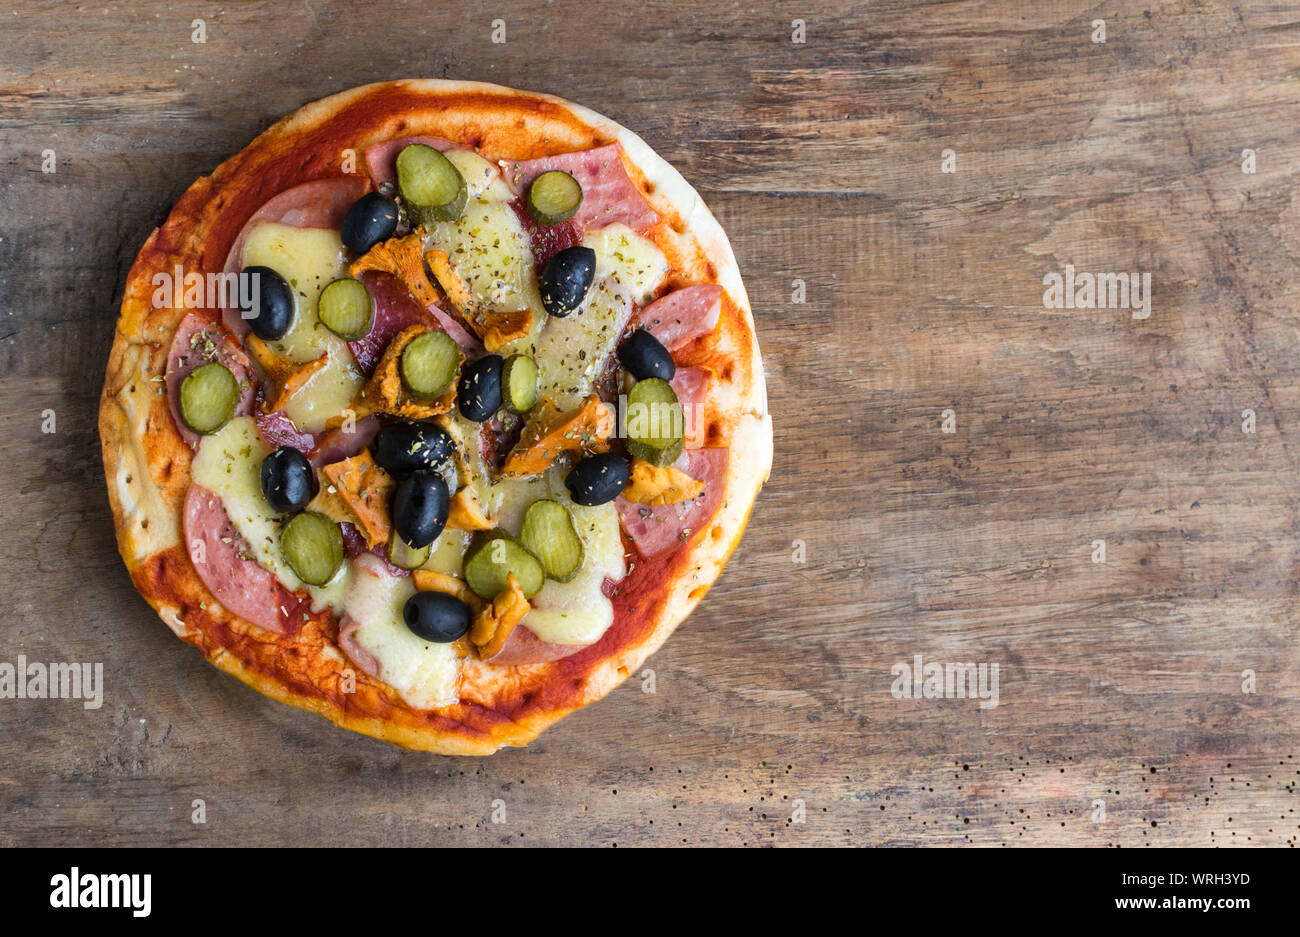 Homemade pizza with tomato sauce, cheese , olives , ham and mushrooms on wooden table. High angle view with space for text Stock Photo